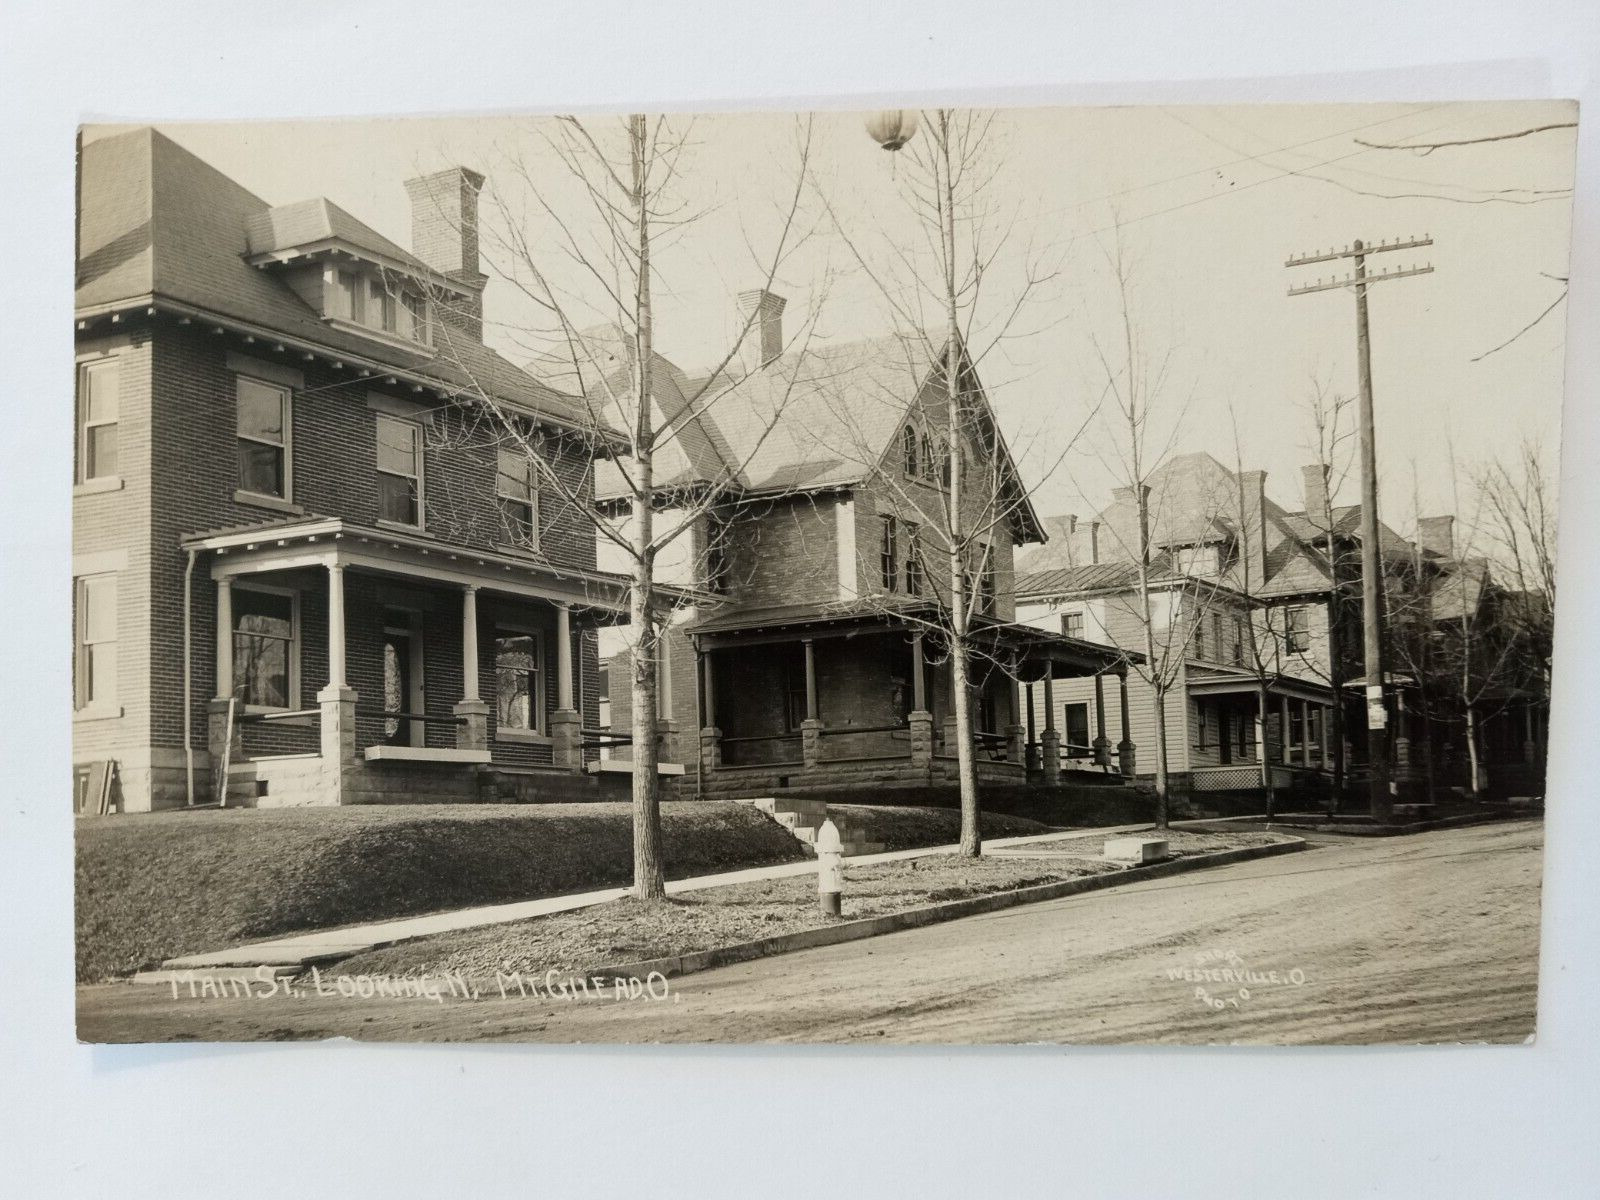 MT GILEAD OHIO REAL PHOTO POSTCARD 1910 MAIN STREET SHORT PUBLISHER WESTERVILLE